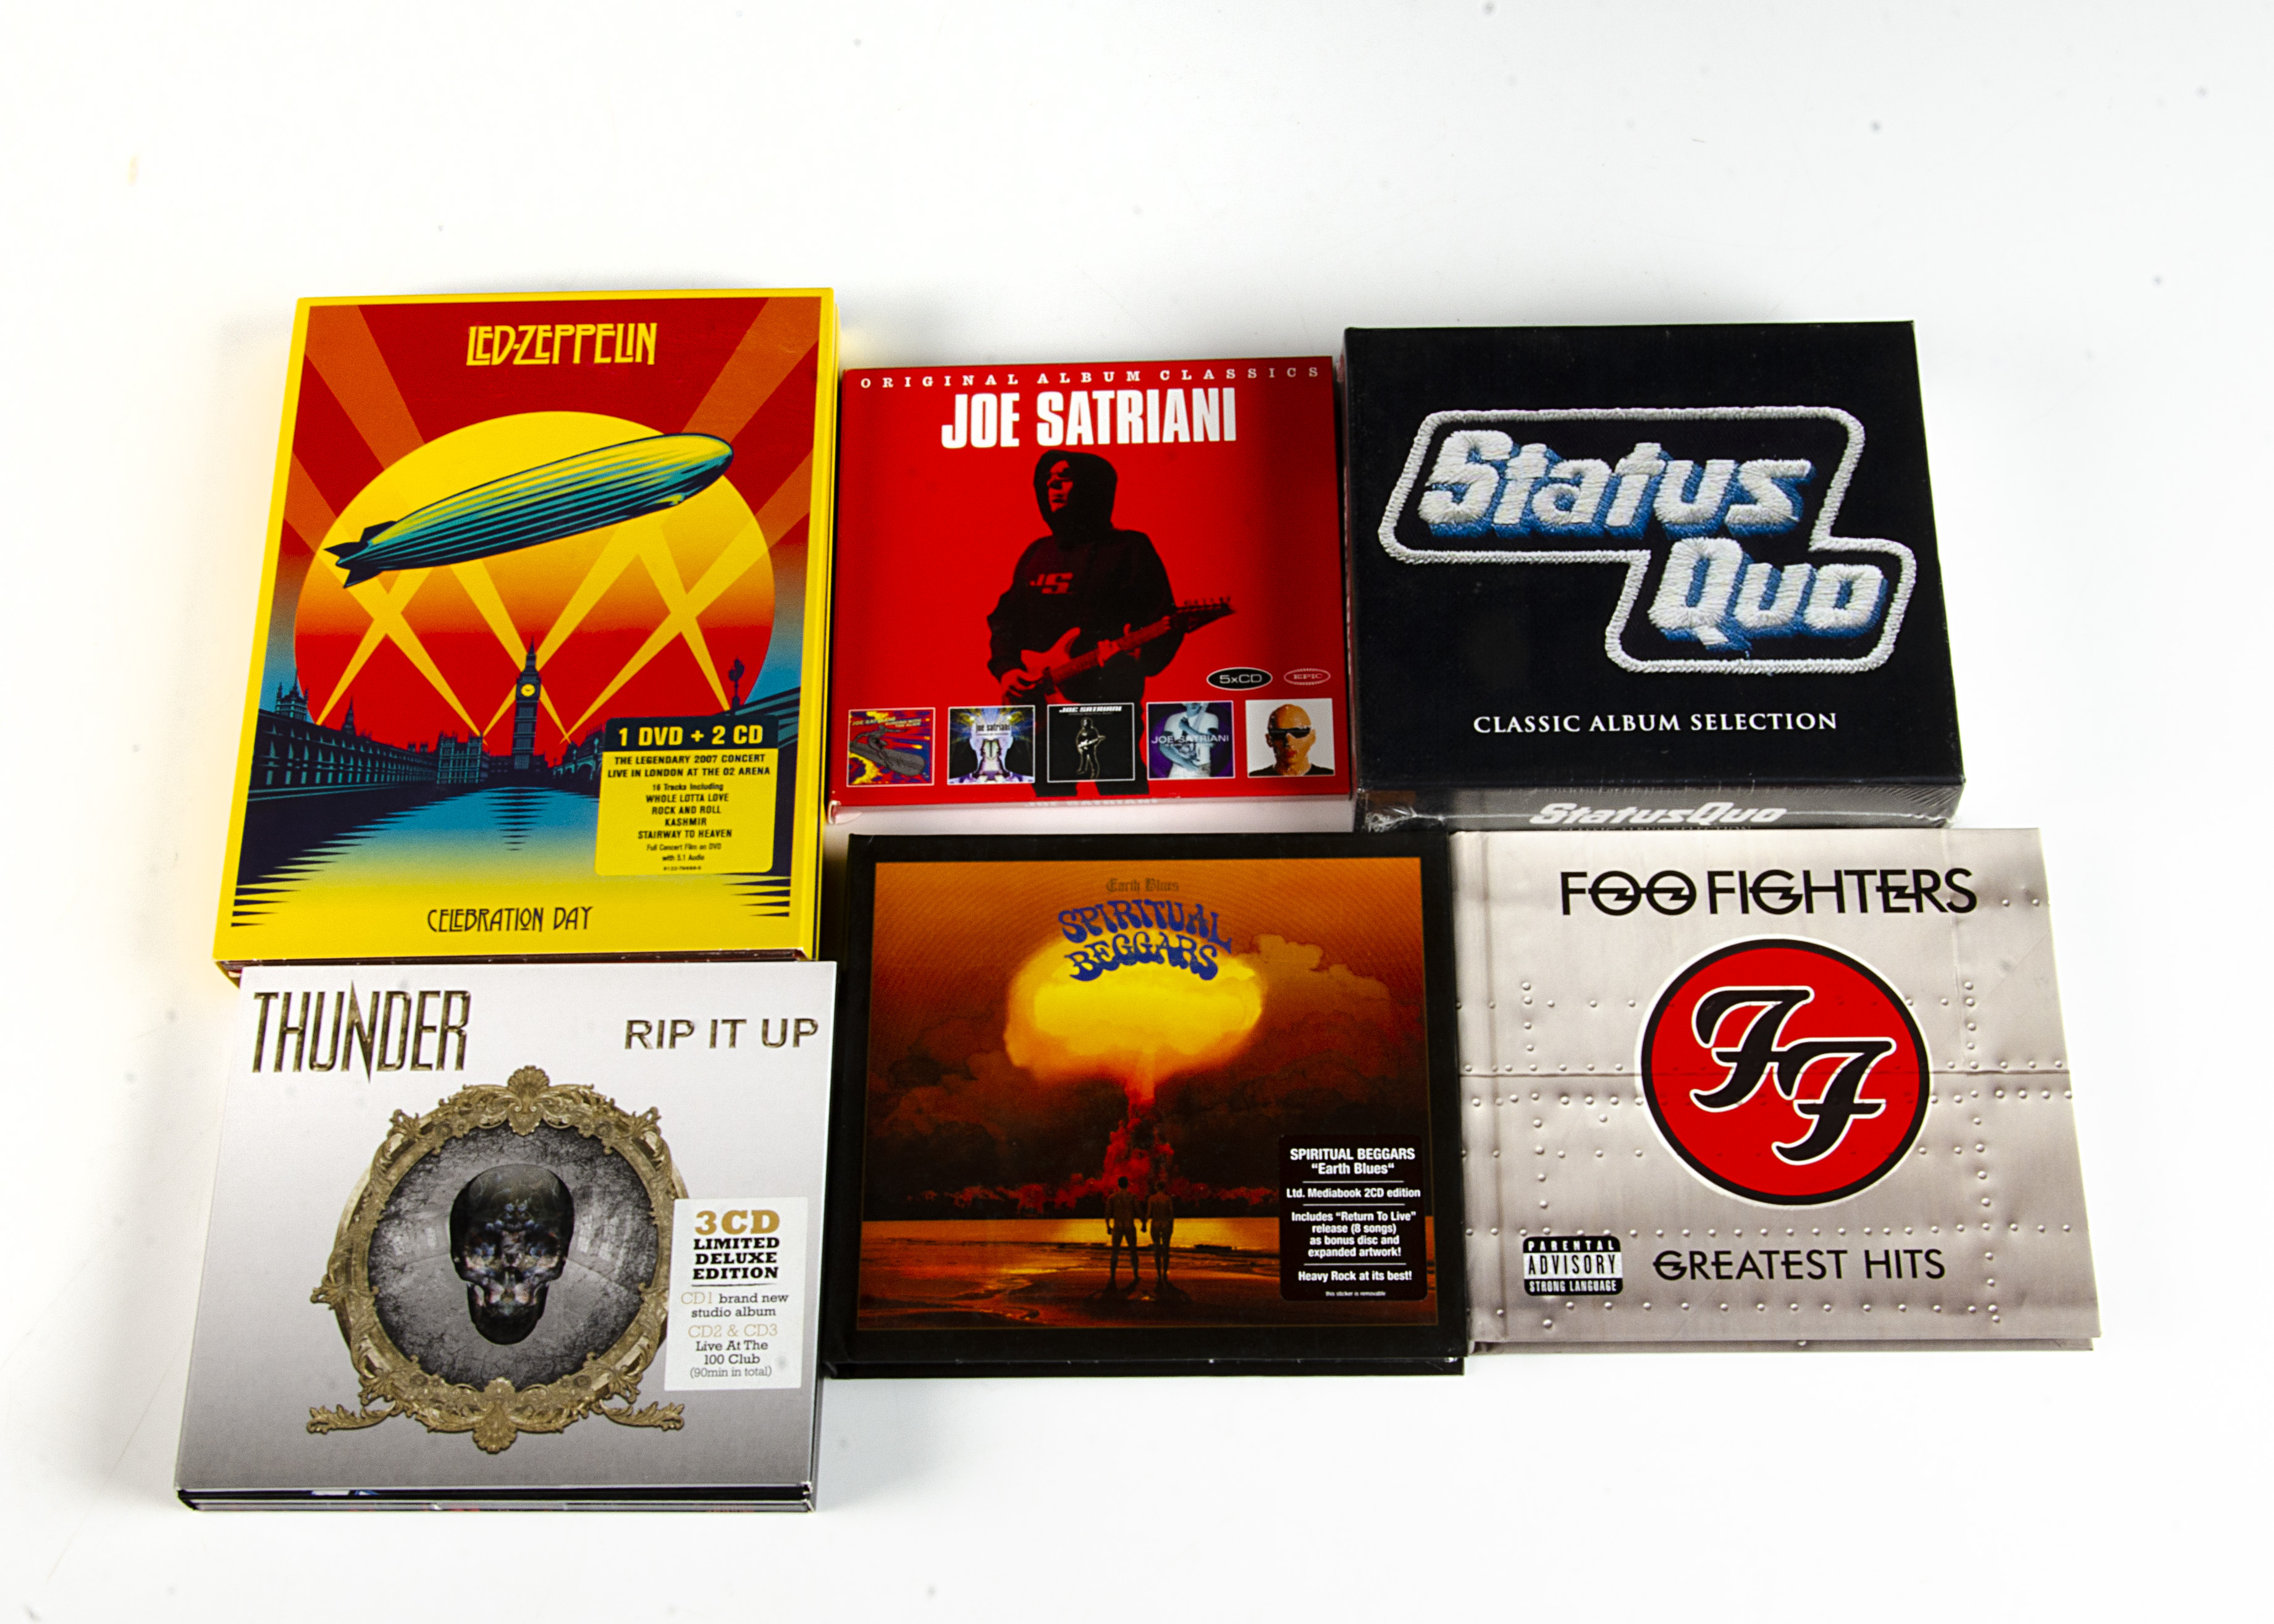 Rock CDs and Box Sets, approximately fifty-five CDs and Box Sets of mainly Classic Rock with artists